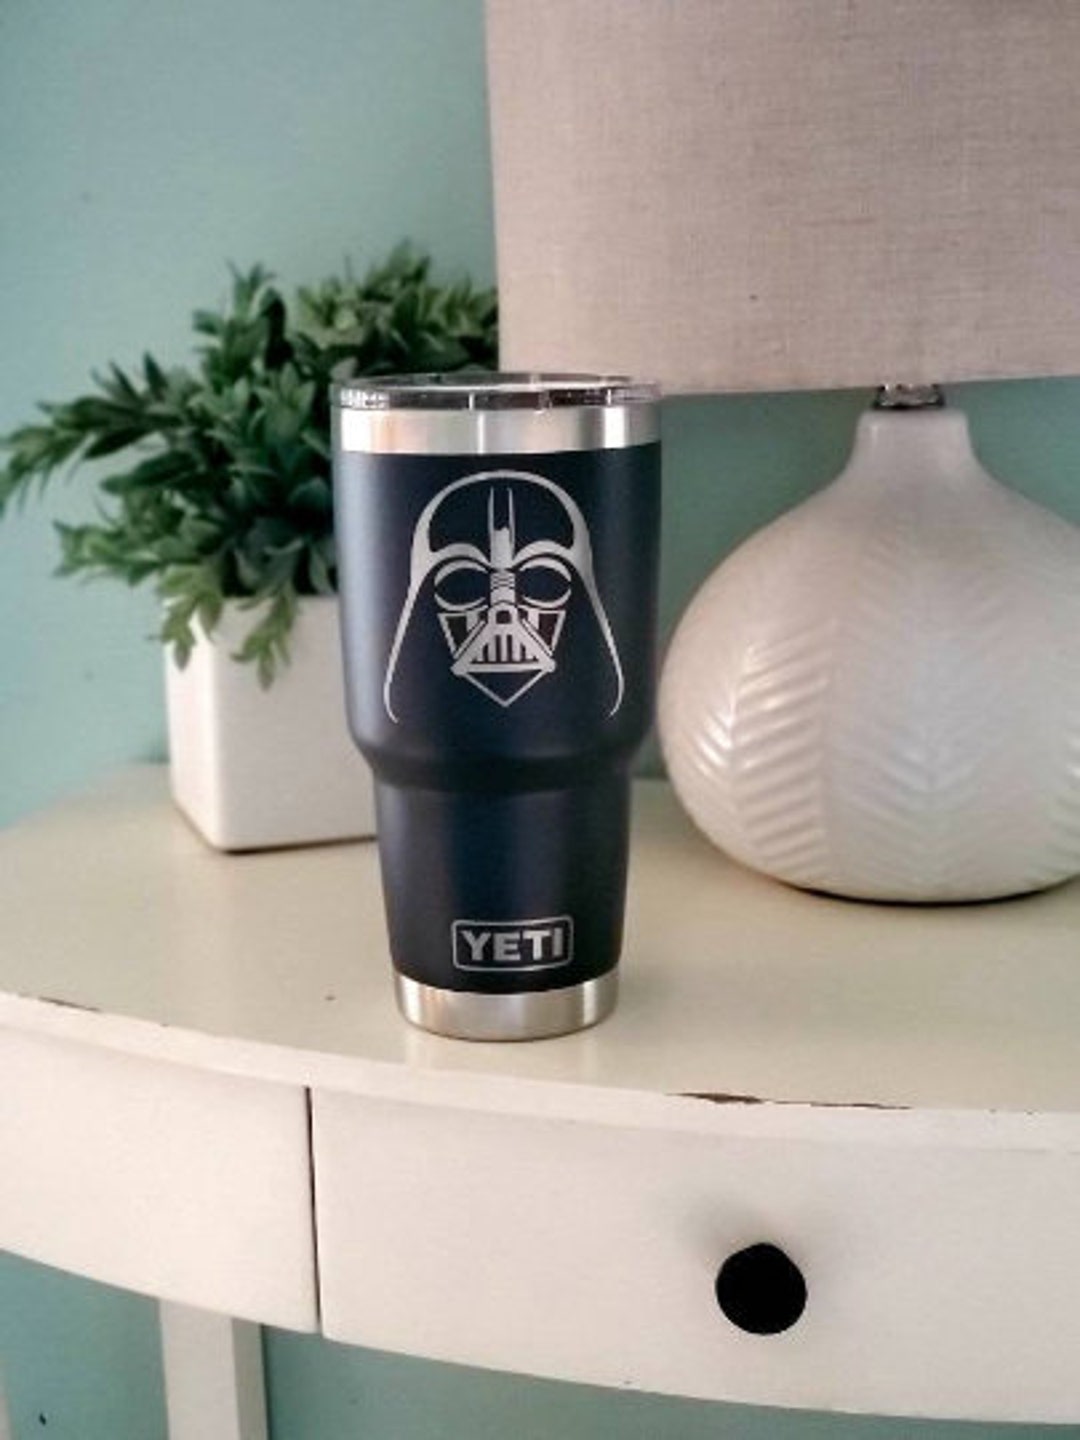 Star Wars - Classic 30oz Stainless Steel with Hammer Lid